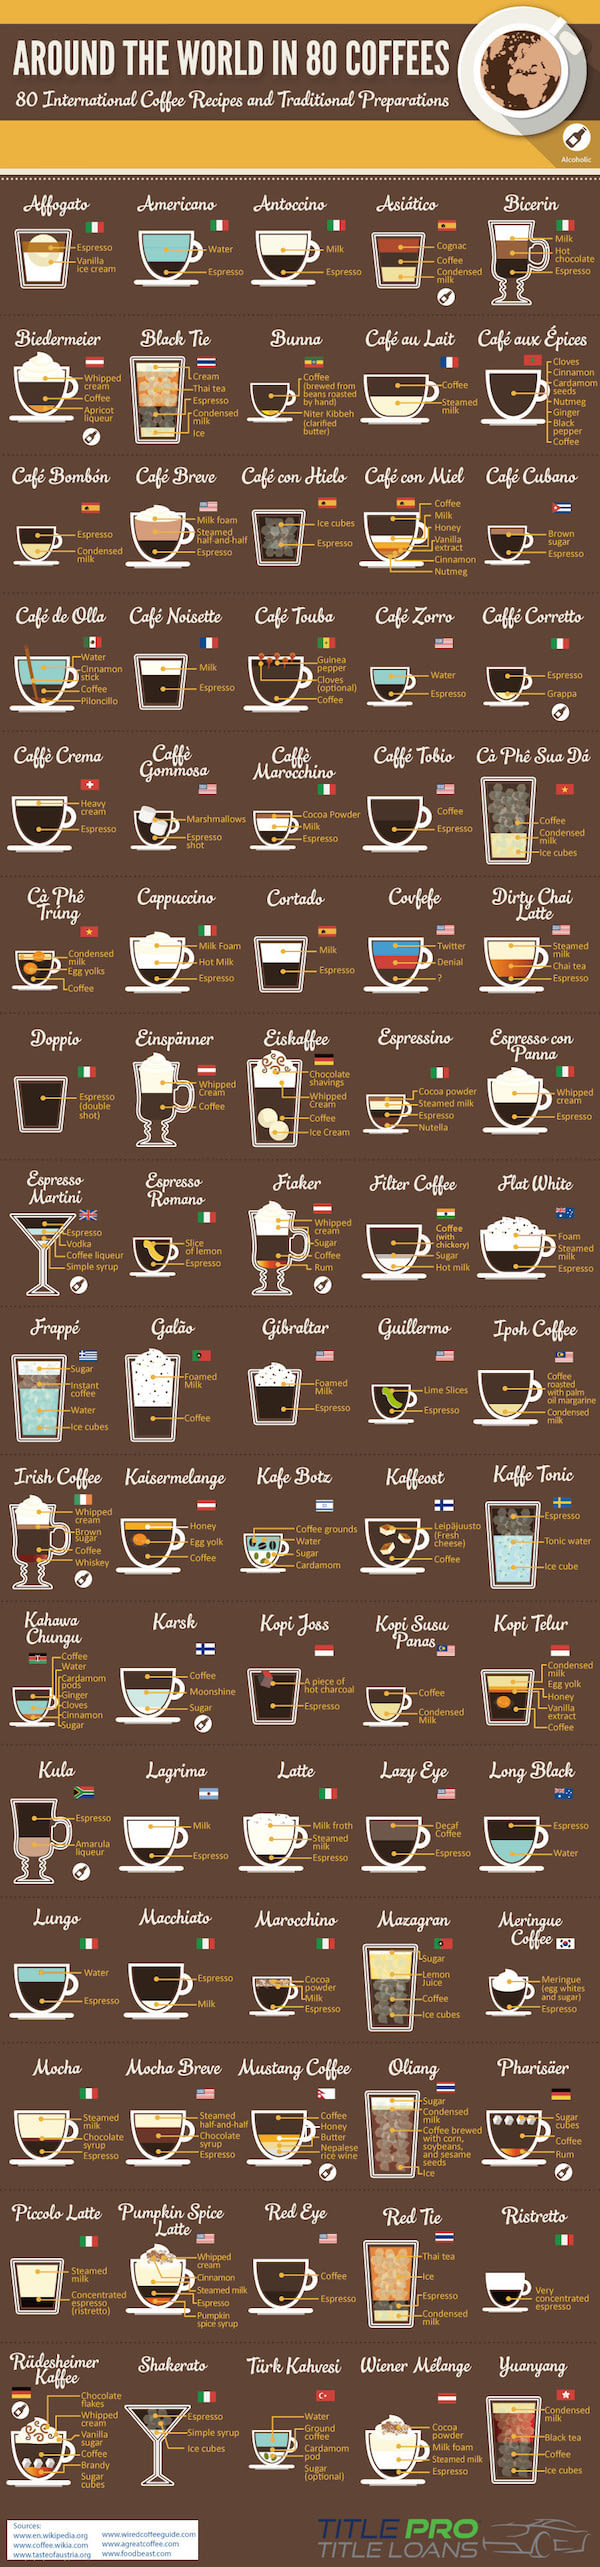 80-Different-Ways-Of-Making-Coffee-From-Countries-The-World.jpg